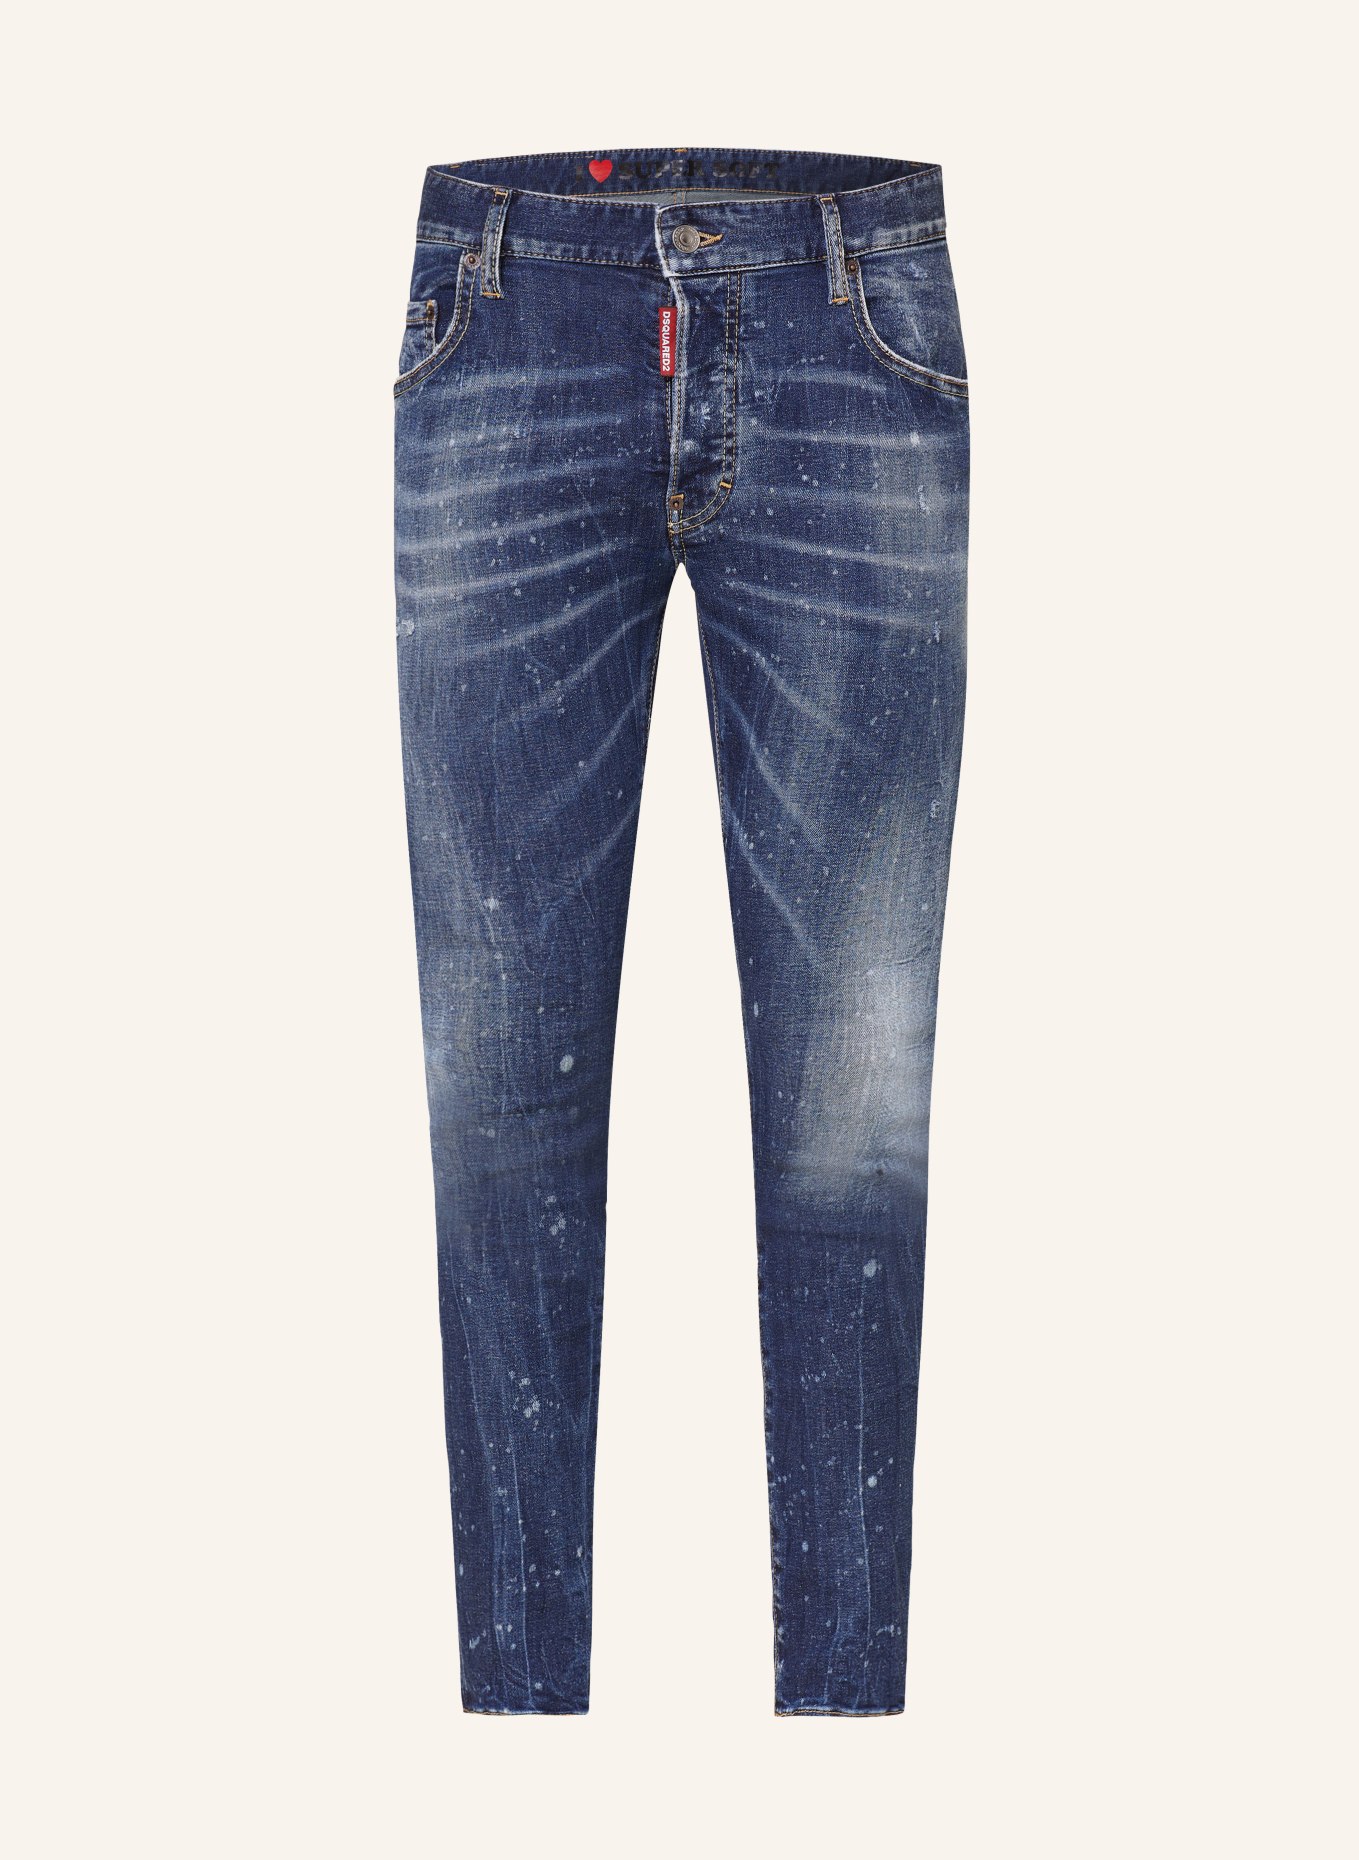 DSQUARED2 Jeans SUPER TWINKY Extra Slim Fit, Farbe: 470 BLUE NAVY (Bild 1)